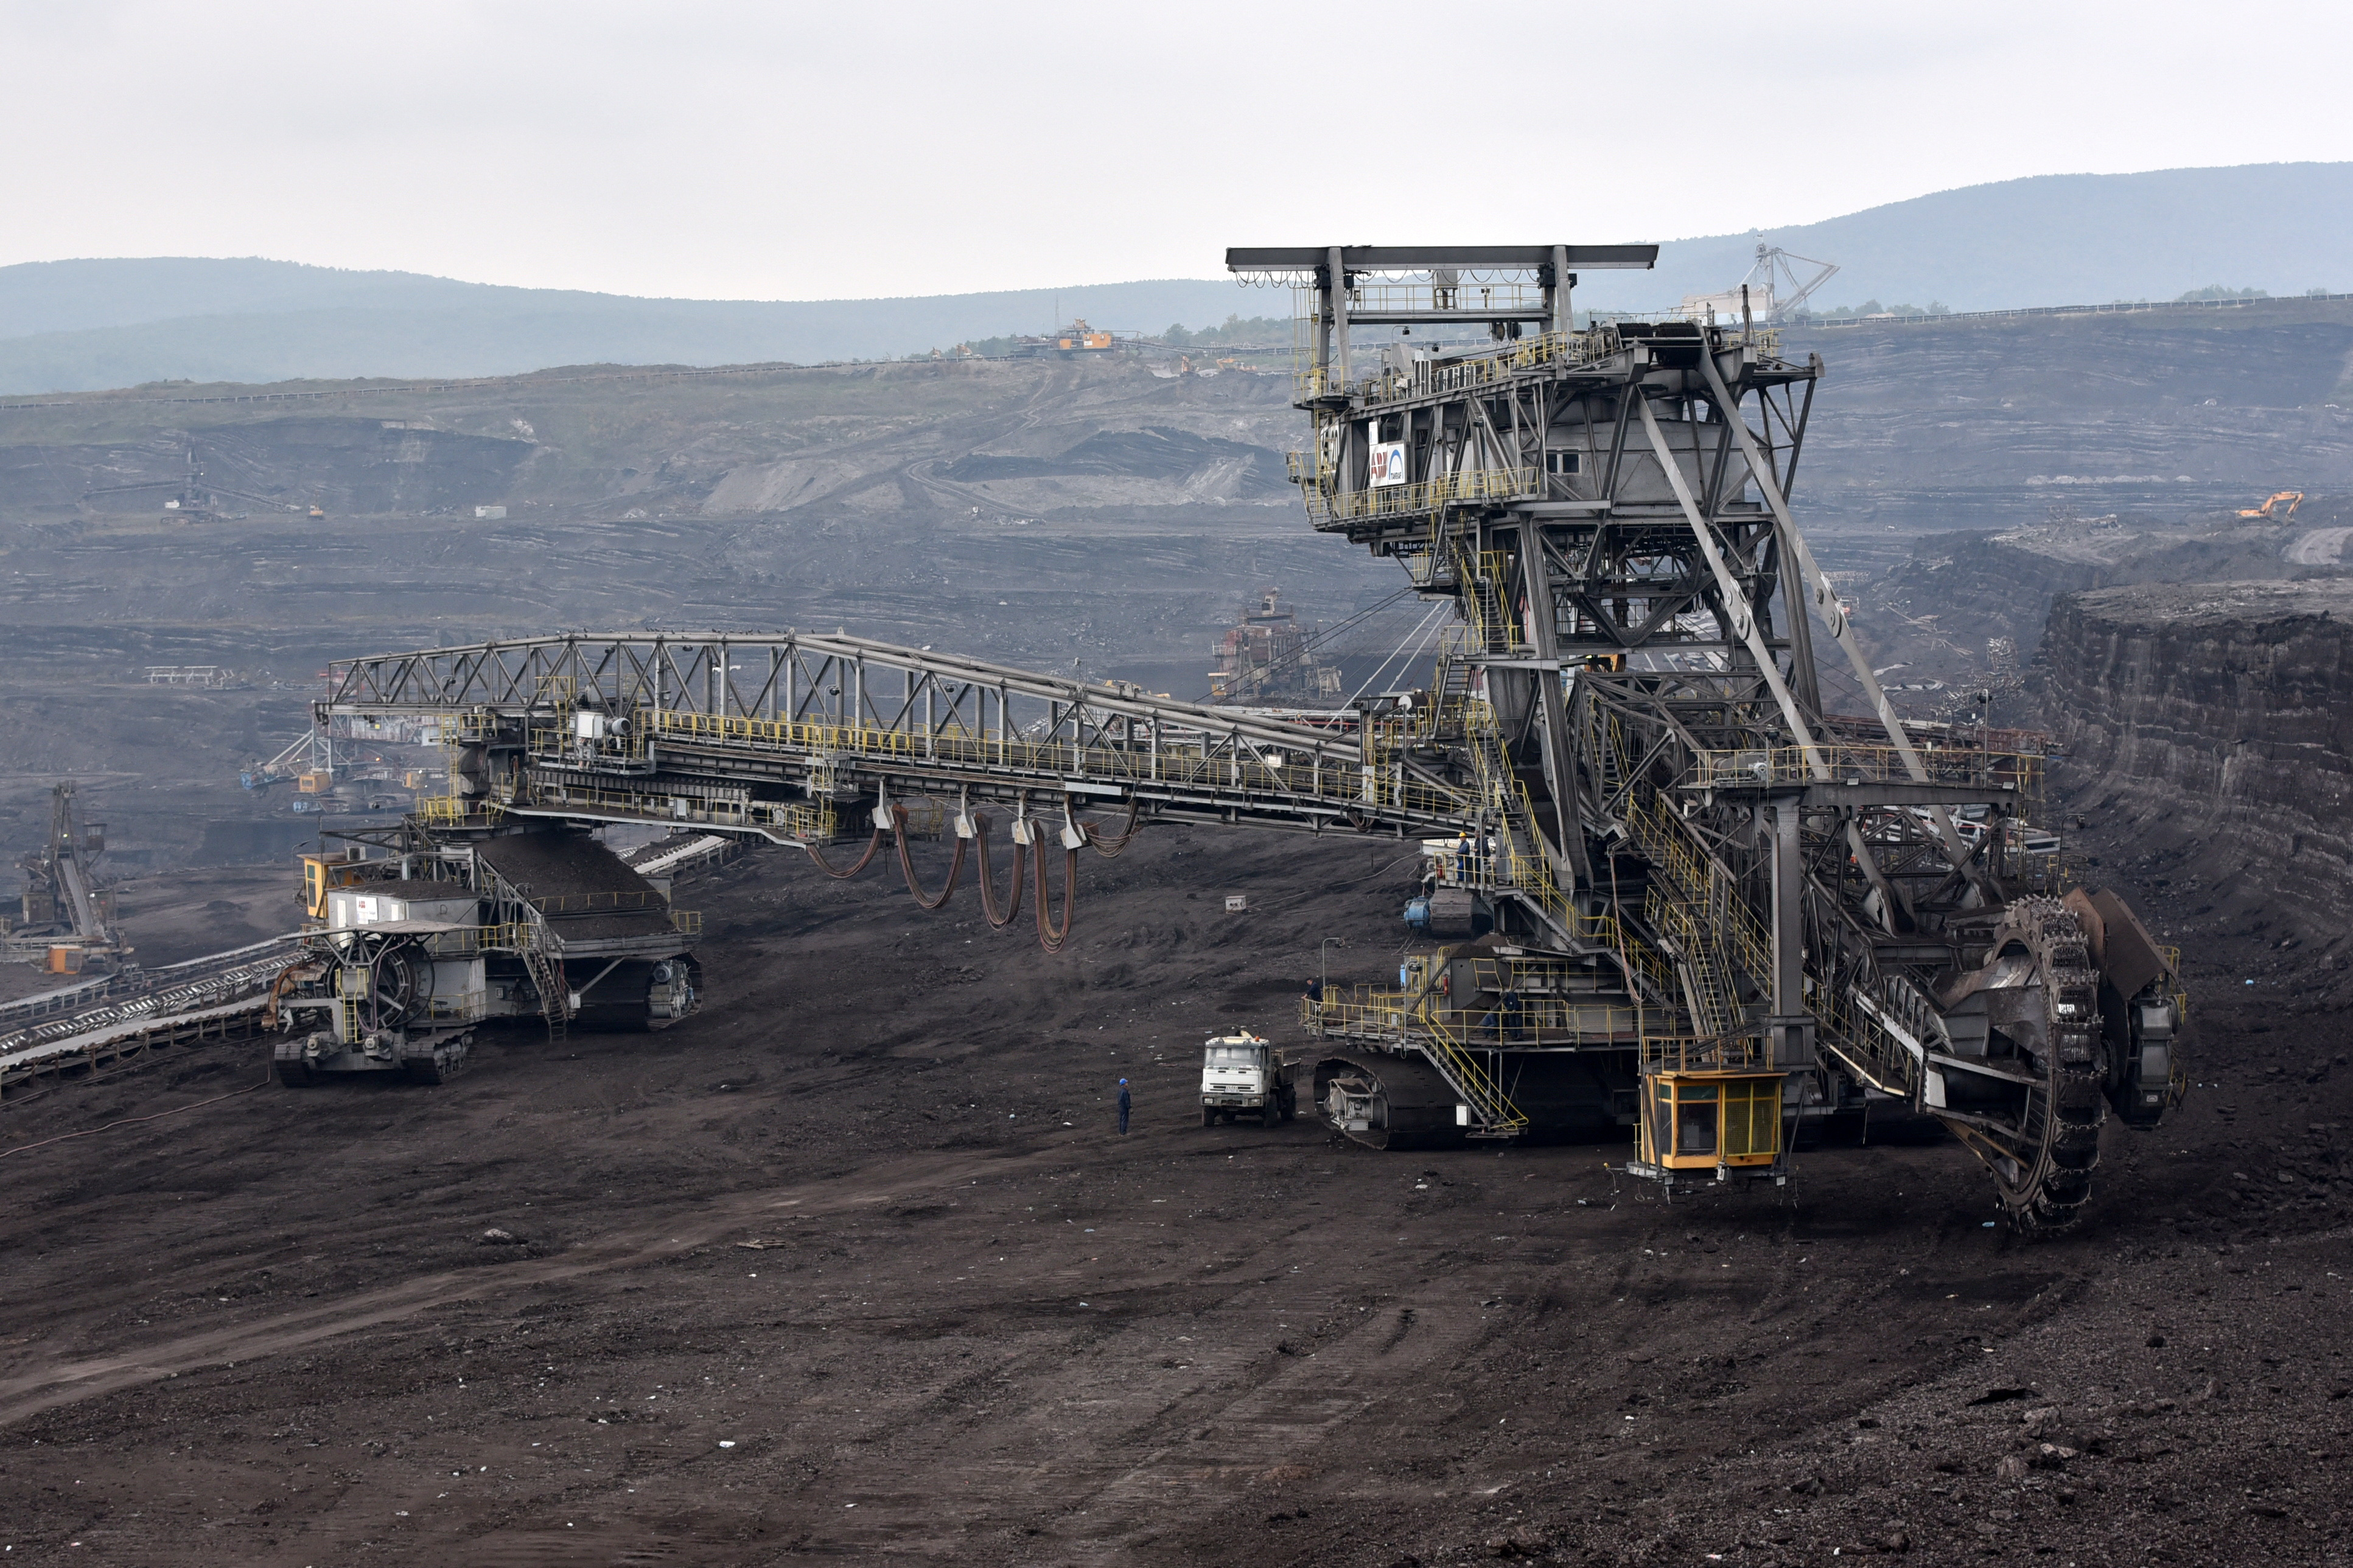 A worker stands at a lignite mine, near the town of Obiliq